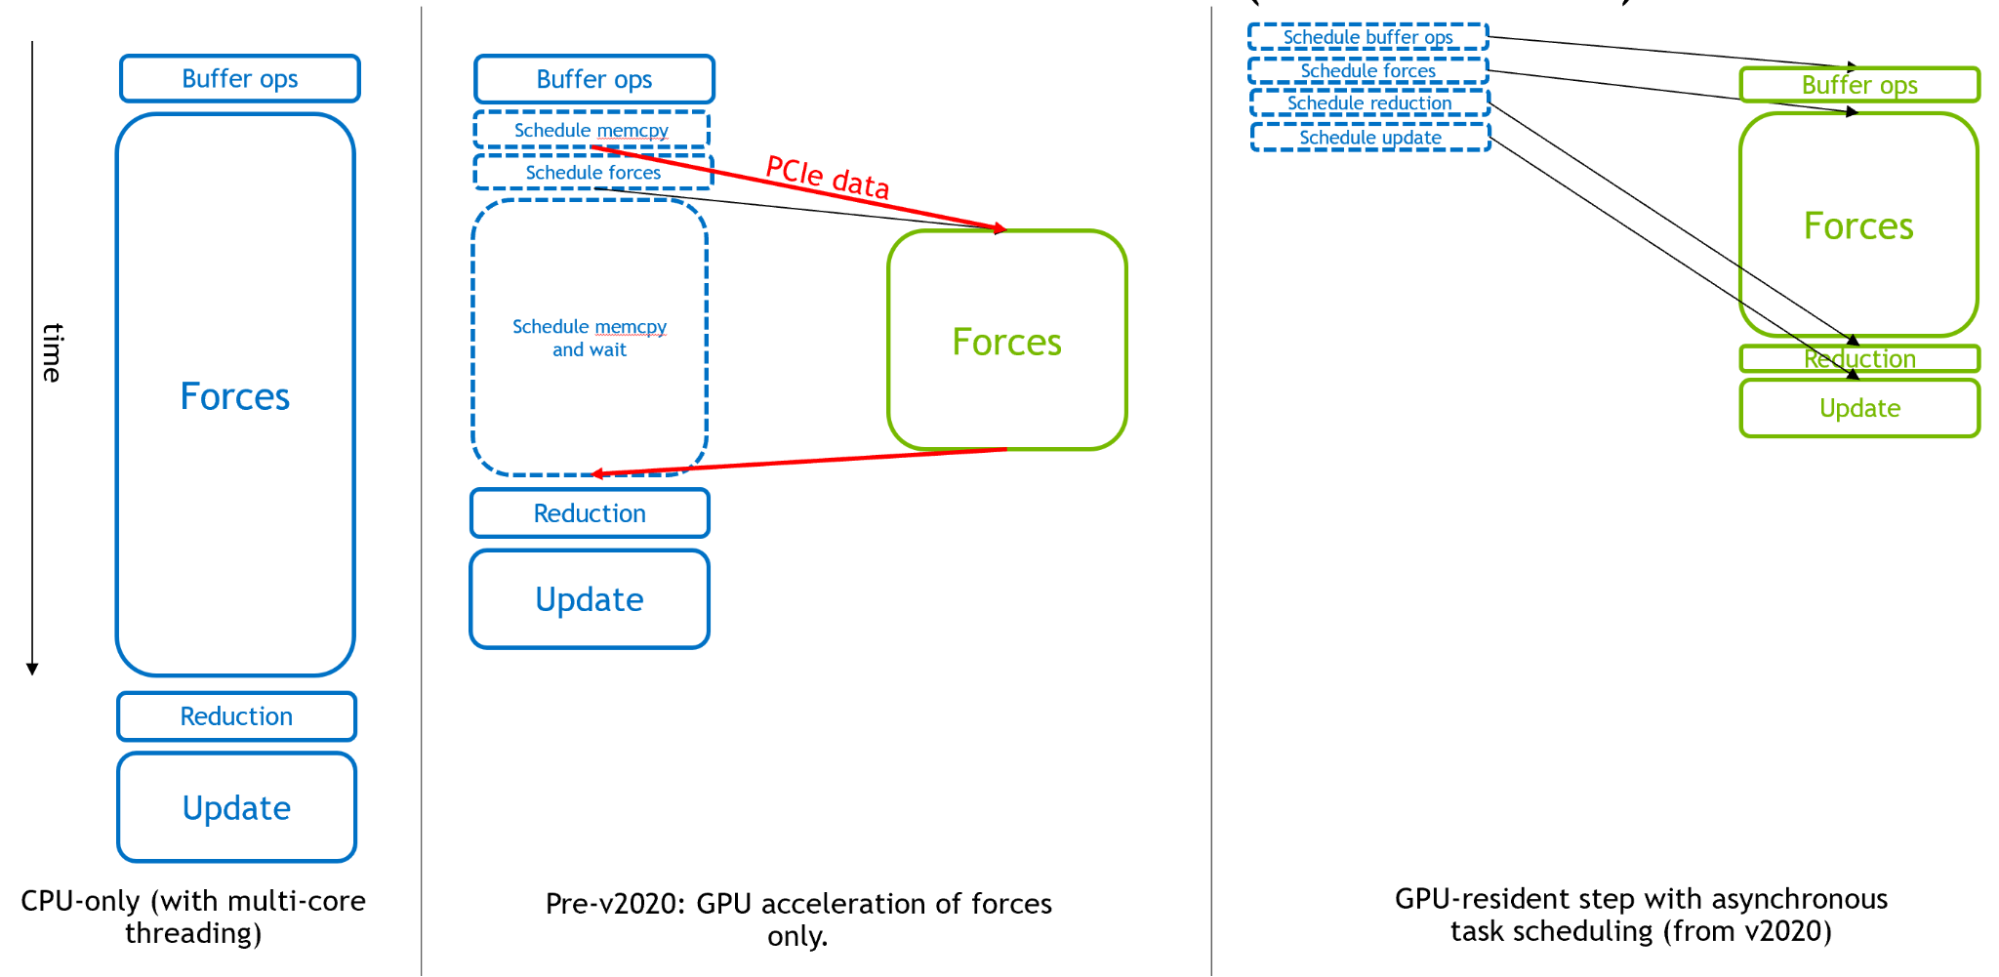 Diagram showing the GPU acceleration benefits with each new GROMACS version. In CPU-only mode (left), solid rectangles correspond to CPU calculations. With only forces offloaded to GPU (center), the CPU performs a mixture of calculations and scheduling activities. In the new GPU-resident mode (right), the CPU is only responsible for scheduling and all calculations are executed on GPU.